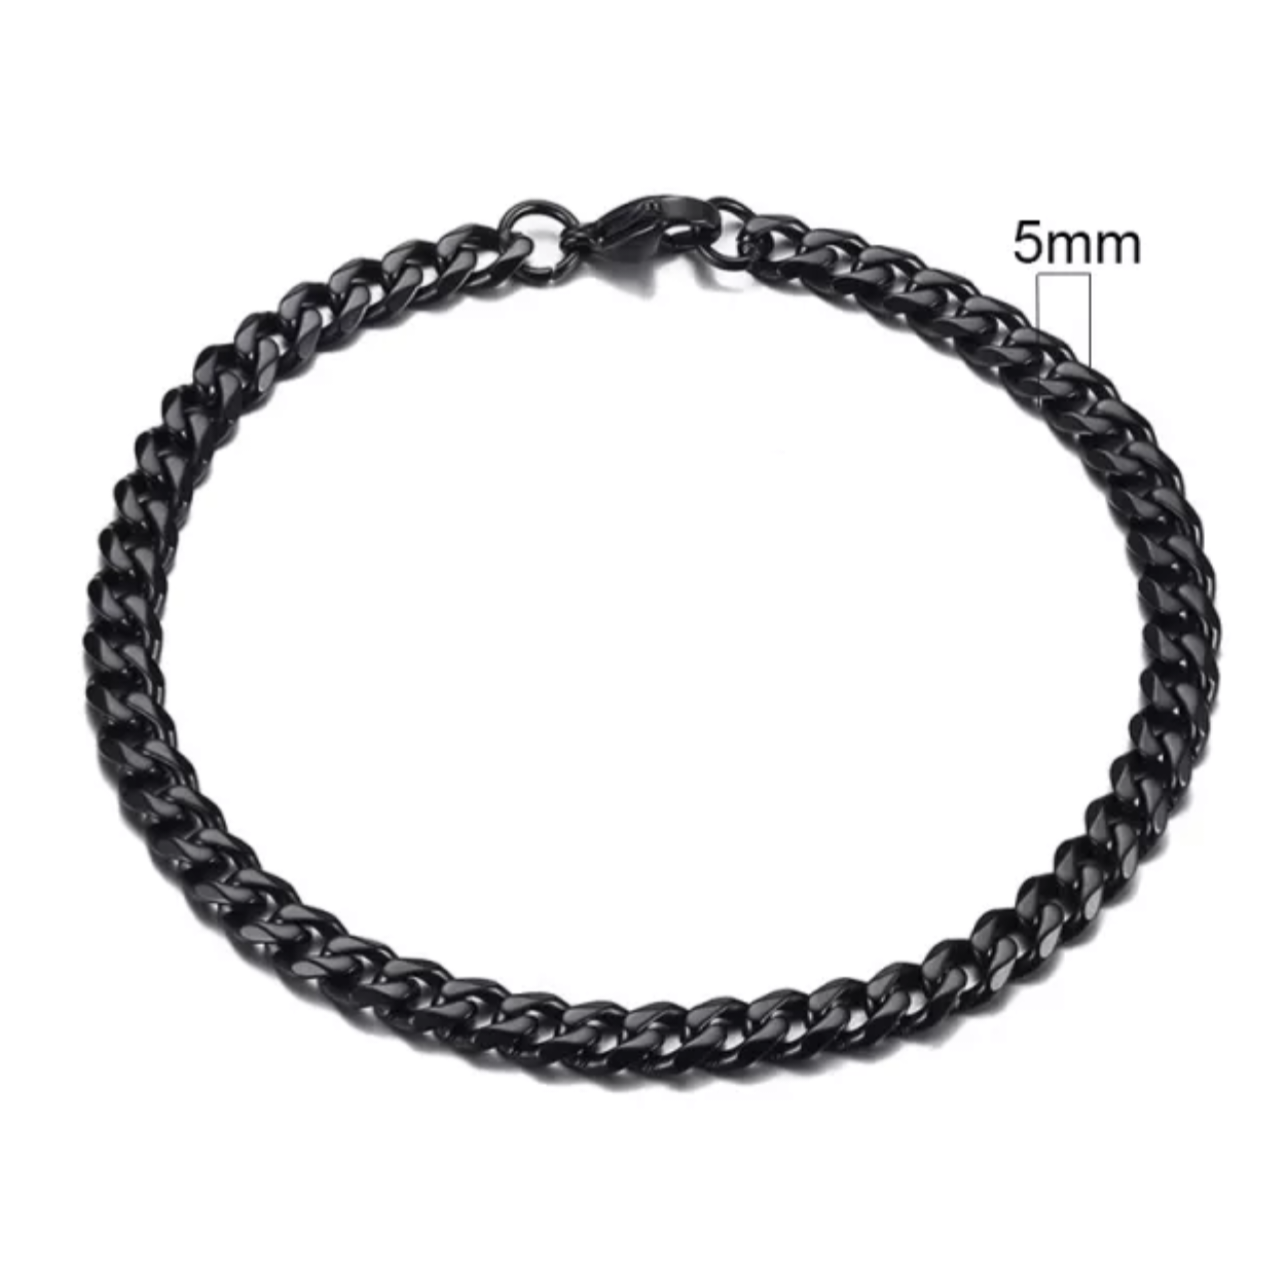 KAZI - Thick Chain Cuban Link Stainless Steel Bracelet - 3mm / 5mm / 7mm / 9mm / 11mm -  Everyday Essentials - Mens Gift - For Him